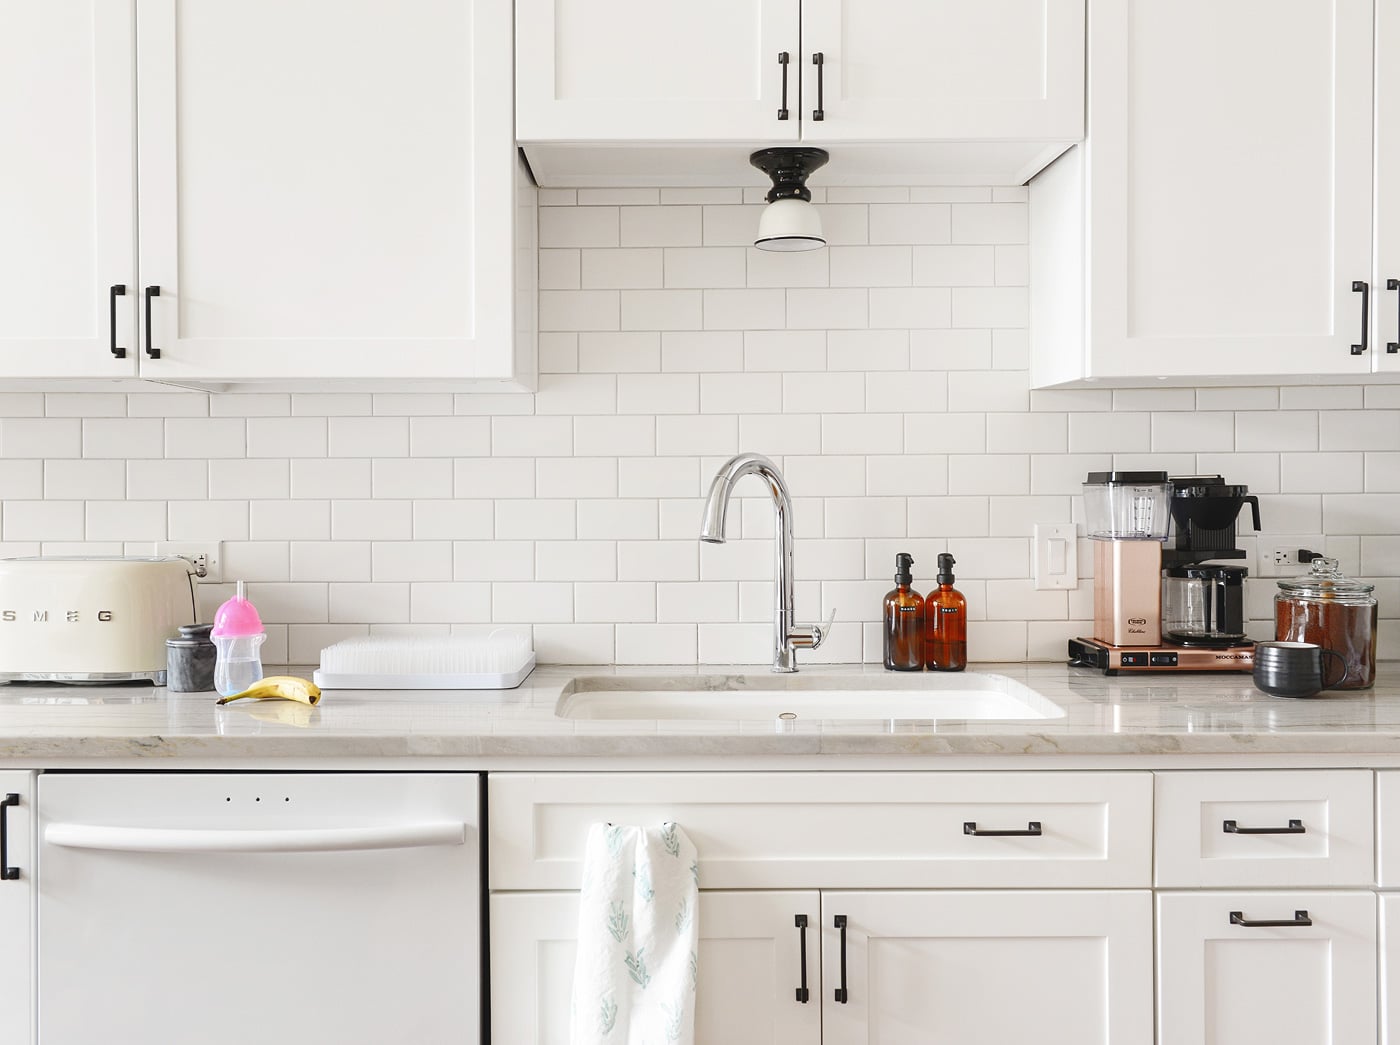 A white kitchen with amber soap pumps | via Yellow Brick Home